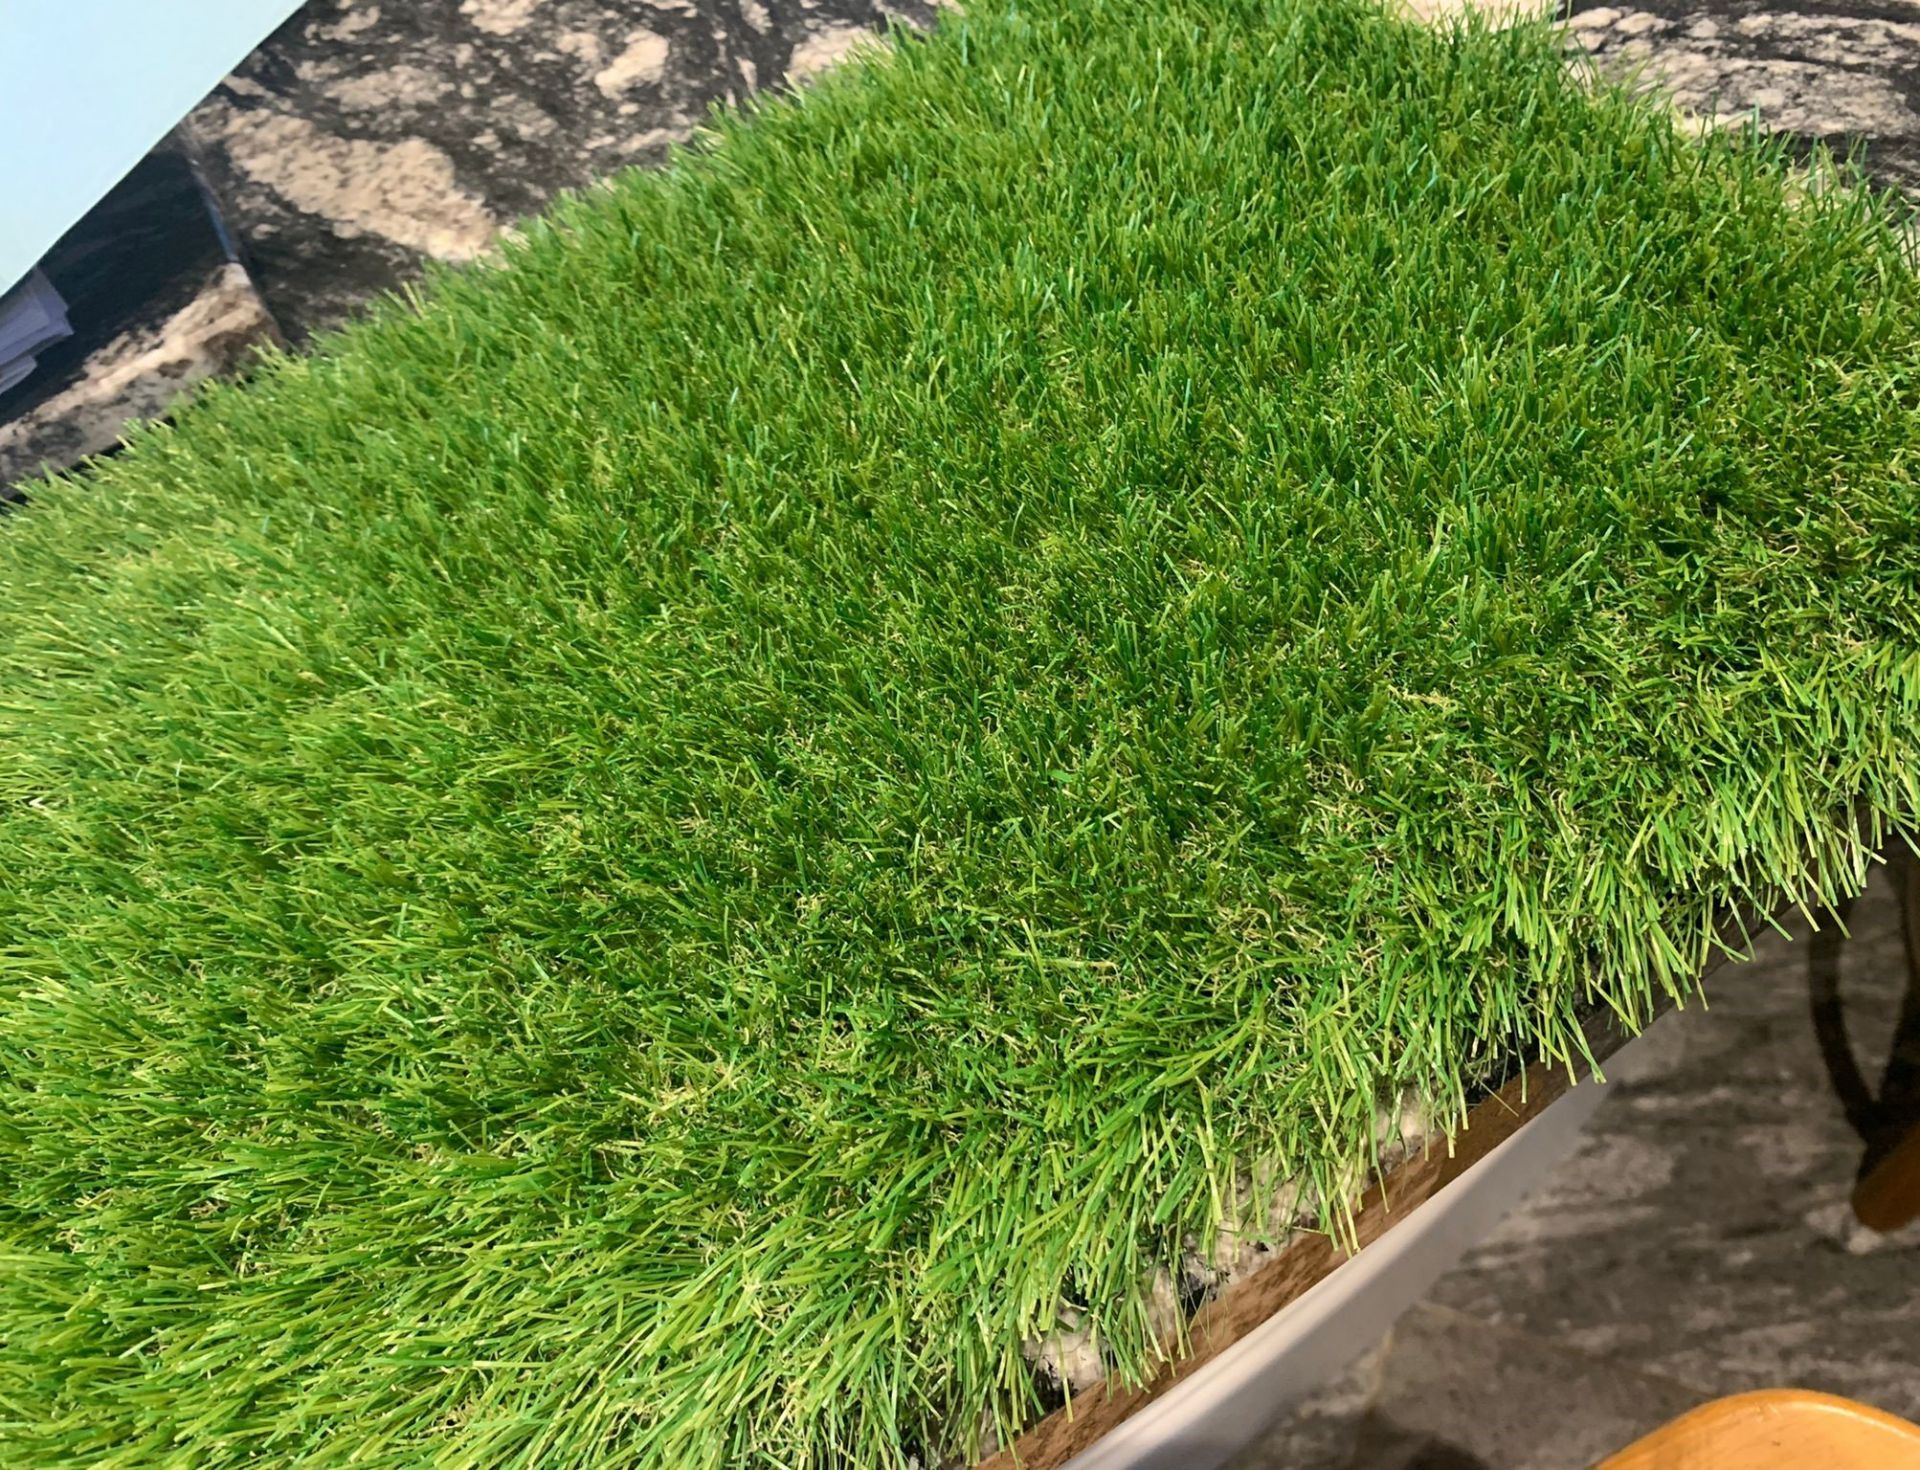 1 x Playrite Nearly Grass - Artificial Grass/Turf - 30X4 Meter Roll - Ref: NWF022 - CL912 - NO VAT - Image 5 of 6